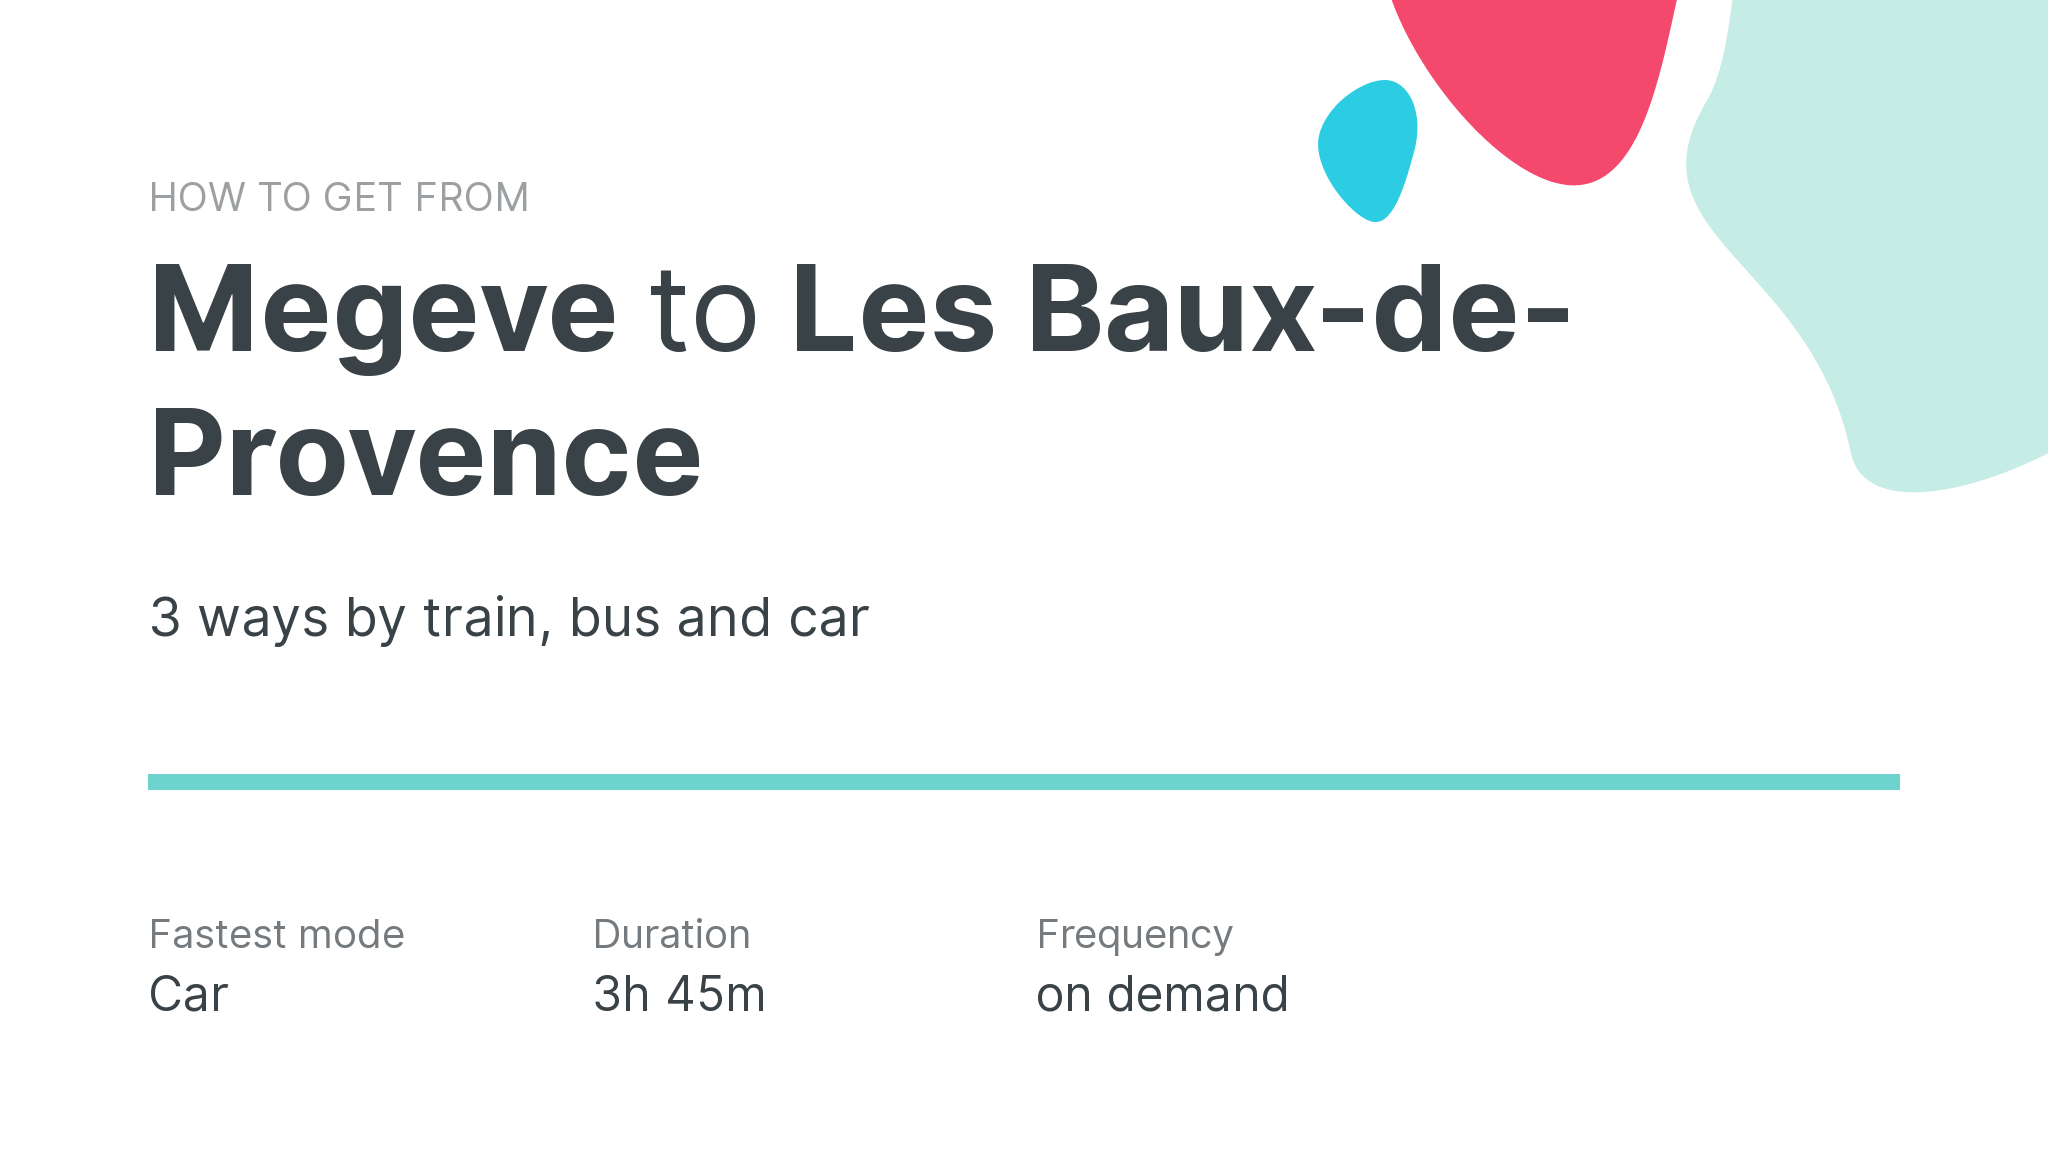 How do I get from Megeve to Les Baux-de-Provence